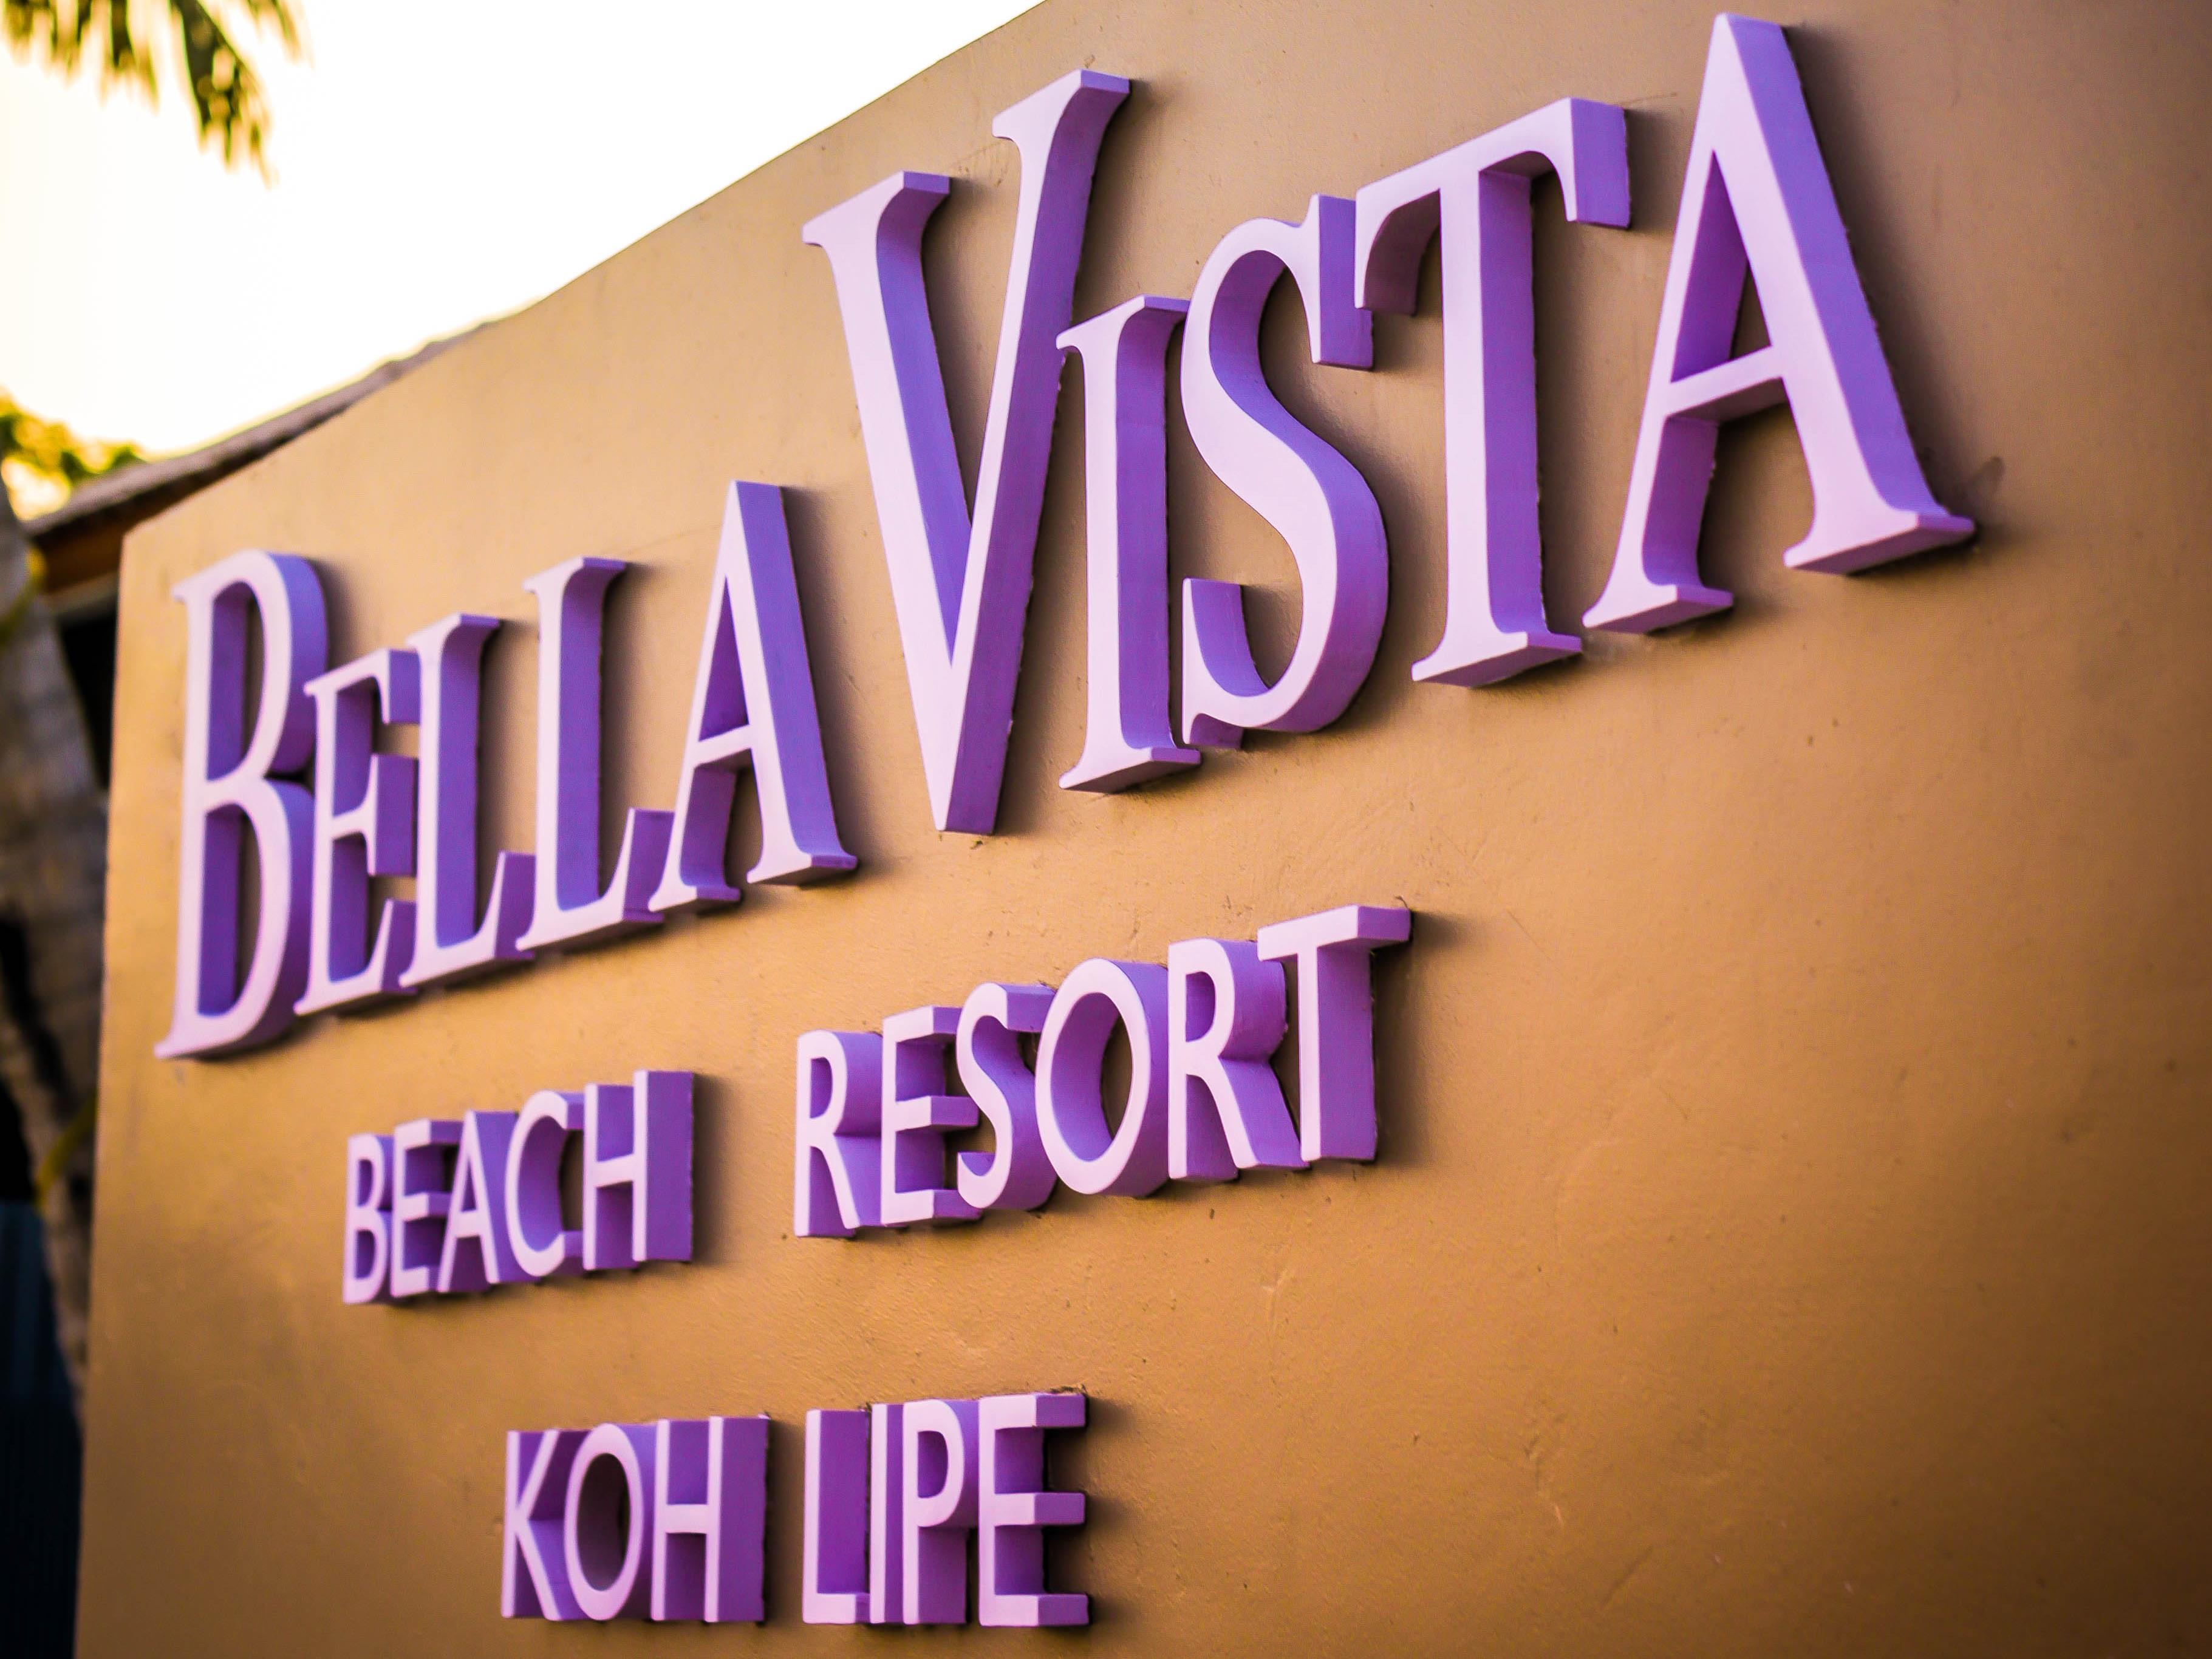 Bella Vista Beach Resort Koh Lipe Thailand FAQ 2016, What facilities are there in Bella Vista Beach Resort Koh Lipe Thailand 2016, What Languages Spoken are Supported in Bella Vista Beach Resort Koh Lipe Thailand 2016, Which payment cards are accepted in Bella Vista Beach Resort Koh Lipe Thailand , Thailand Bella Vista Beach Resort Koh Lipe room facilities and services Q&A 2016, Thailand Bella Vista Beach Resort Koh Lipe online booking services 2016, Thailand Bella Vista Beach Resort Koh Lipe address 2016, Thailand Bella Vista Beach Resort Koh Lipe telephone number 2016,Thailand Bella Vista Beach Resort Koh Lipe map 2016, Thailand Bella Vista Beach Resort Koh Lipe traffic guide 2016, how to go Thailand Bella Vista Beach Resort Koh Lipe, Thailand Bella Vista Beach Resort Koh Lipe booking online 2016, Thailand Bella Vista Beach Resort Koh Lipe room types 2016.